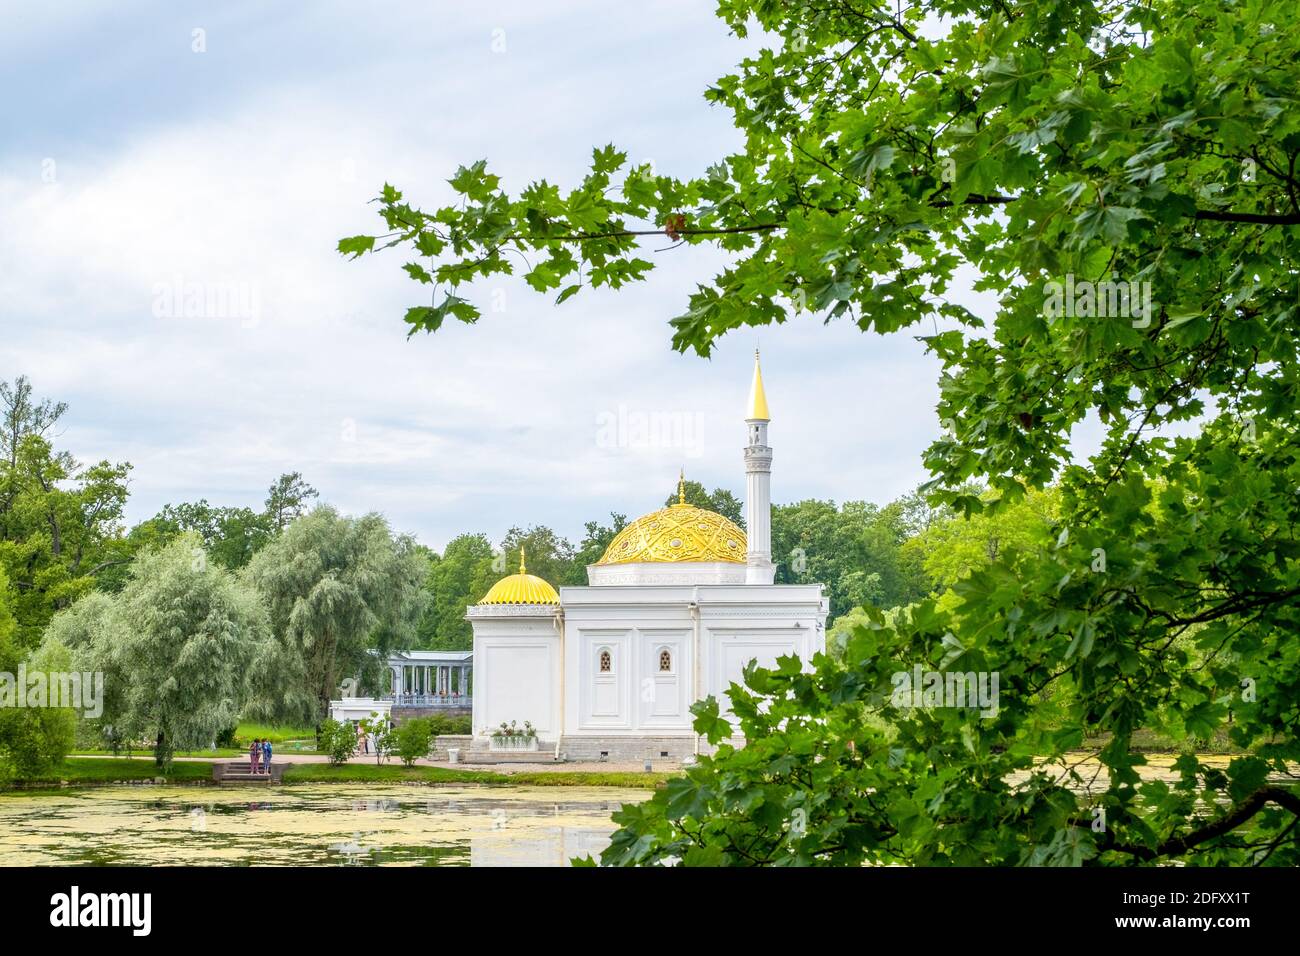 St. Petersburg, Pushkin, Russia. - August 22, 2020. View of the pond and the building of the Turkish Bath in Catherine Park. Local tourism, history, c Stock Photo